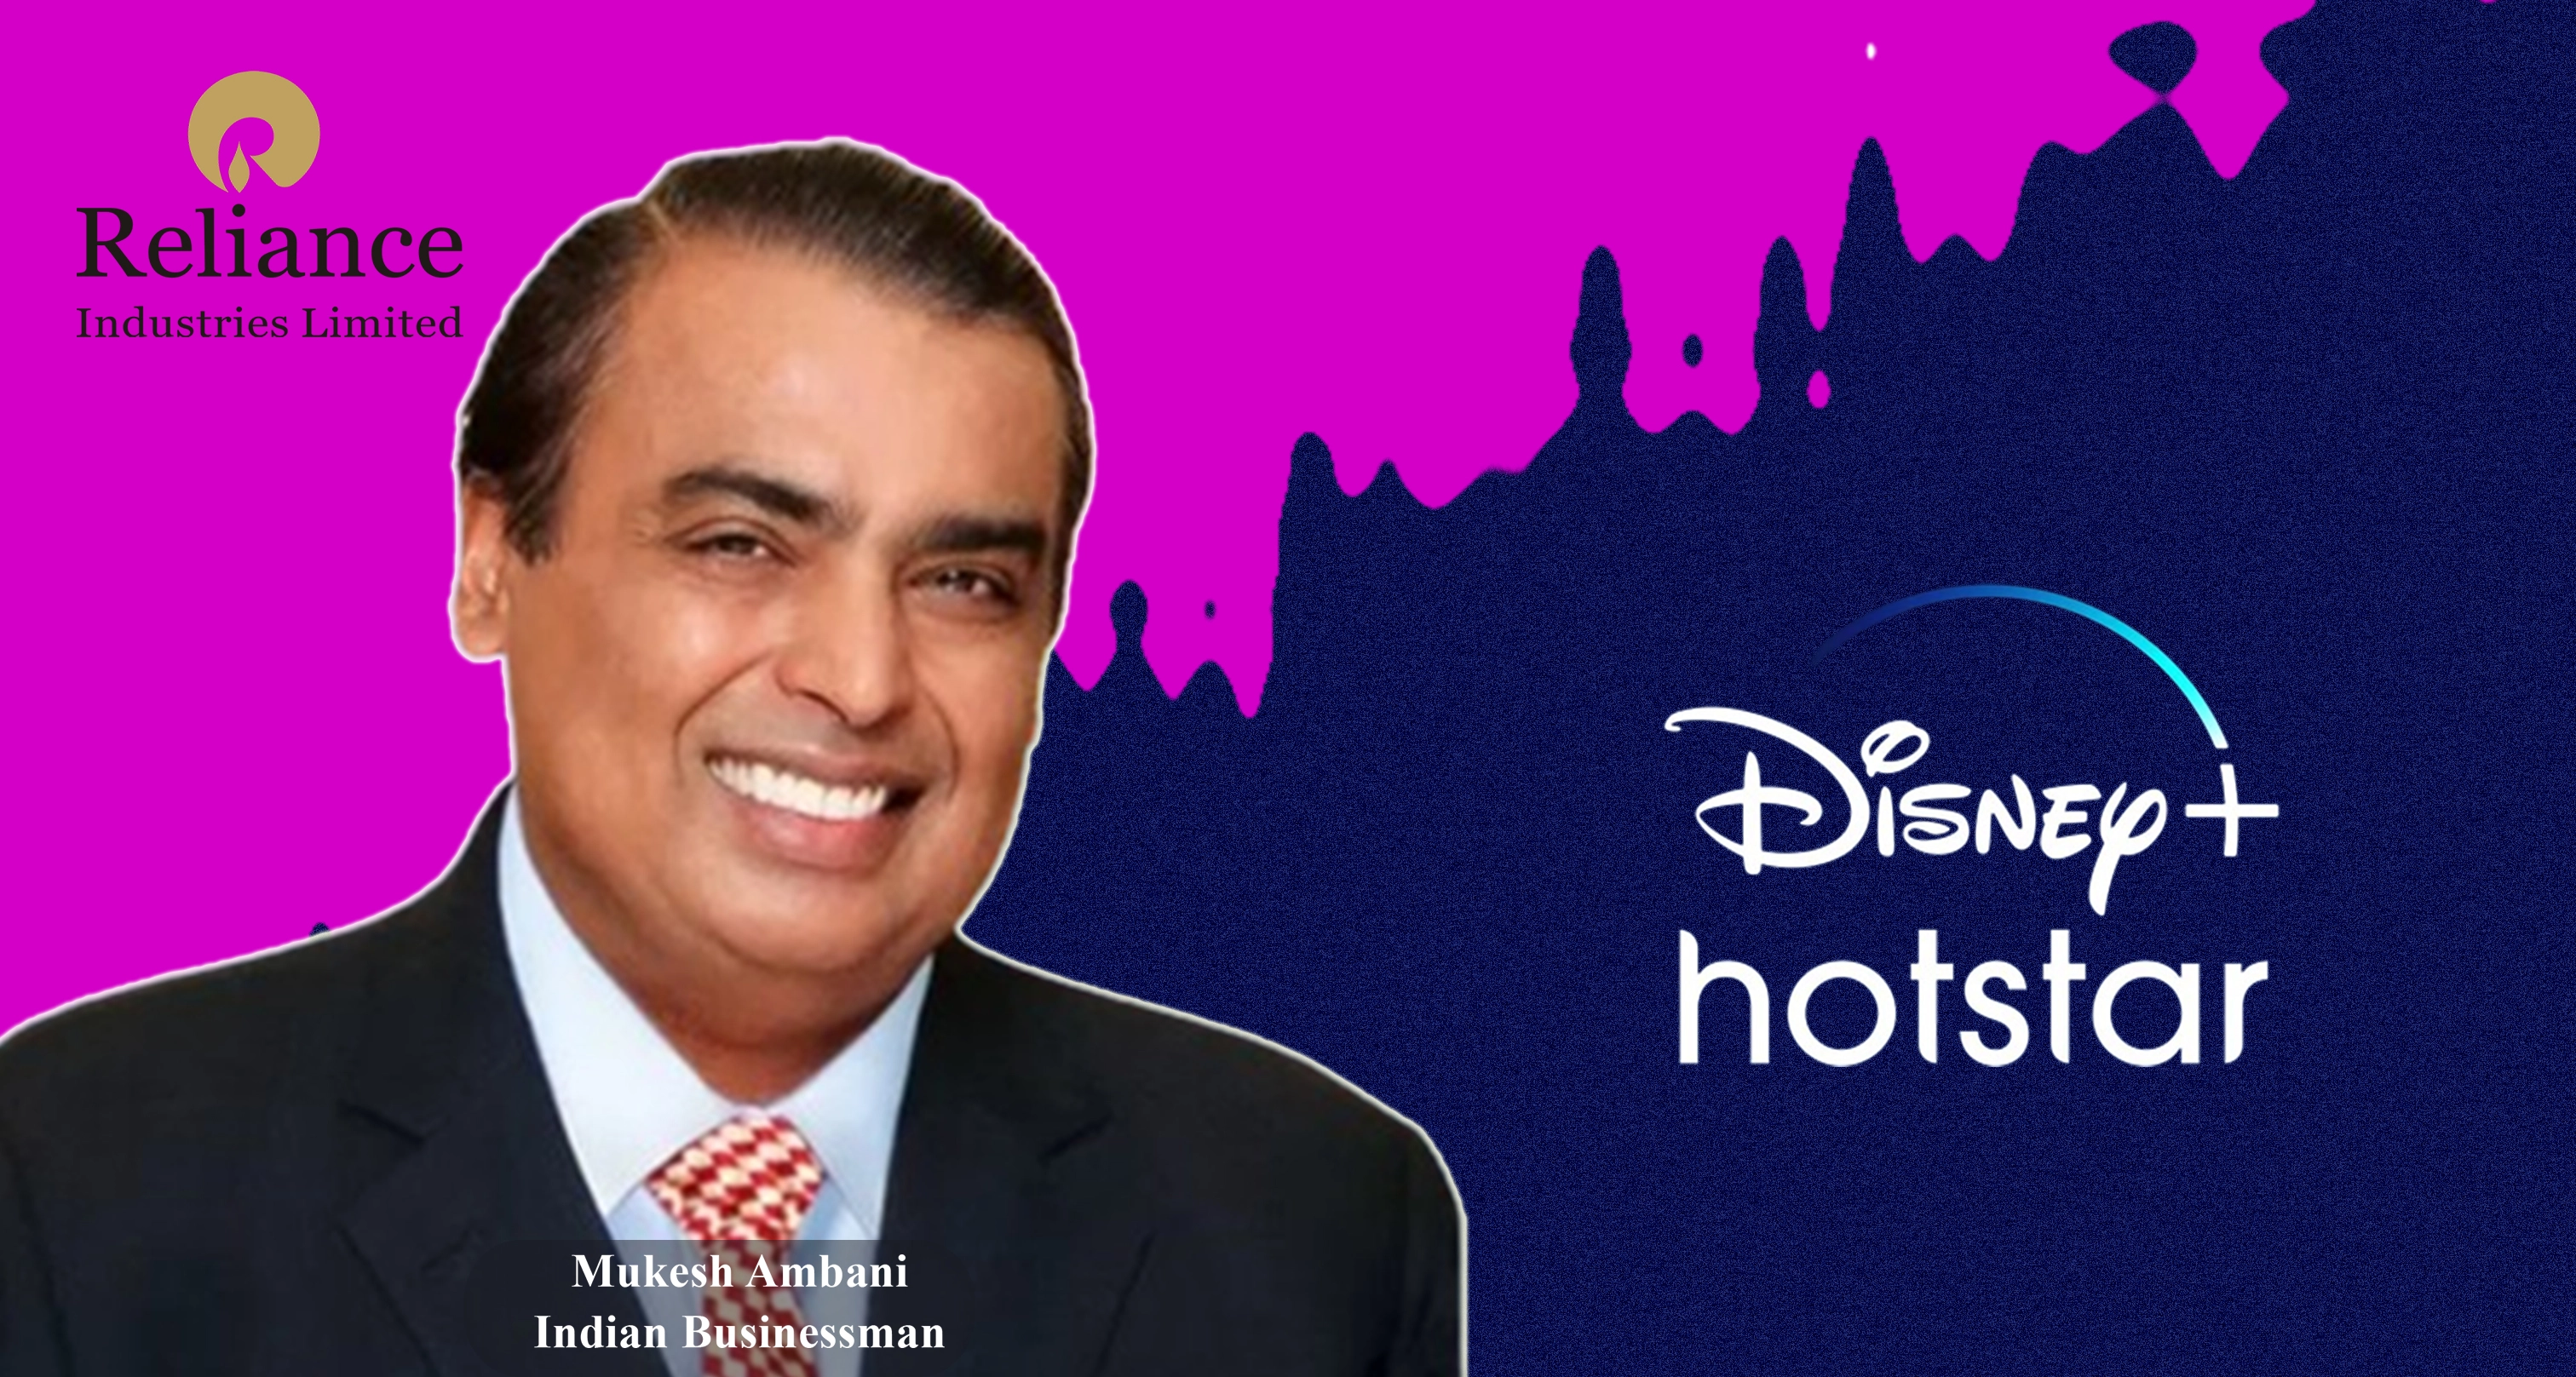 Disney is in talks with Reliance